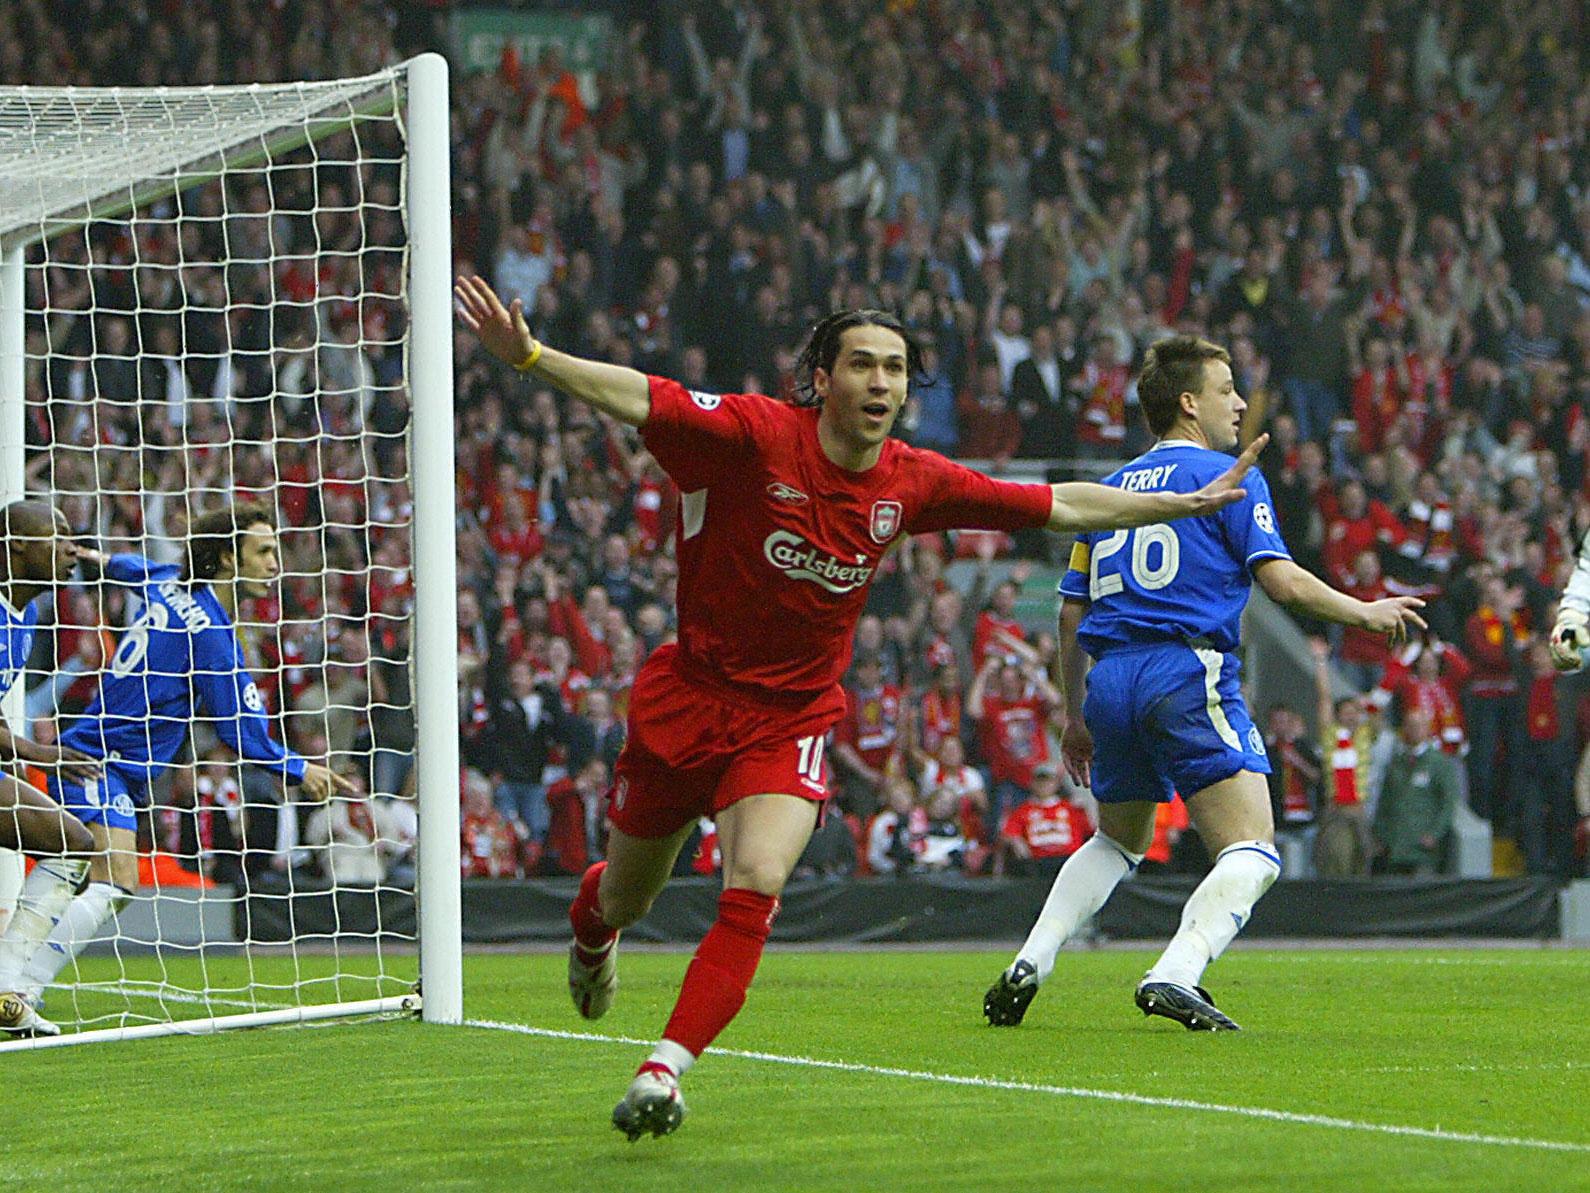 All-Premier League ties in the Champions League have featured some unforgettable moments